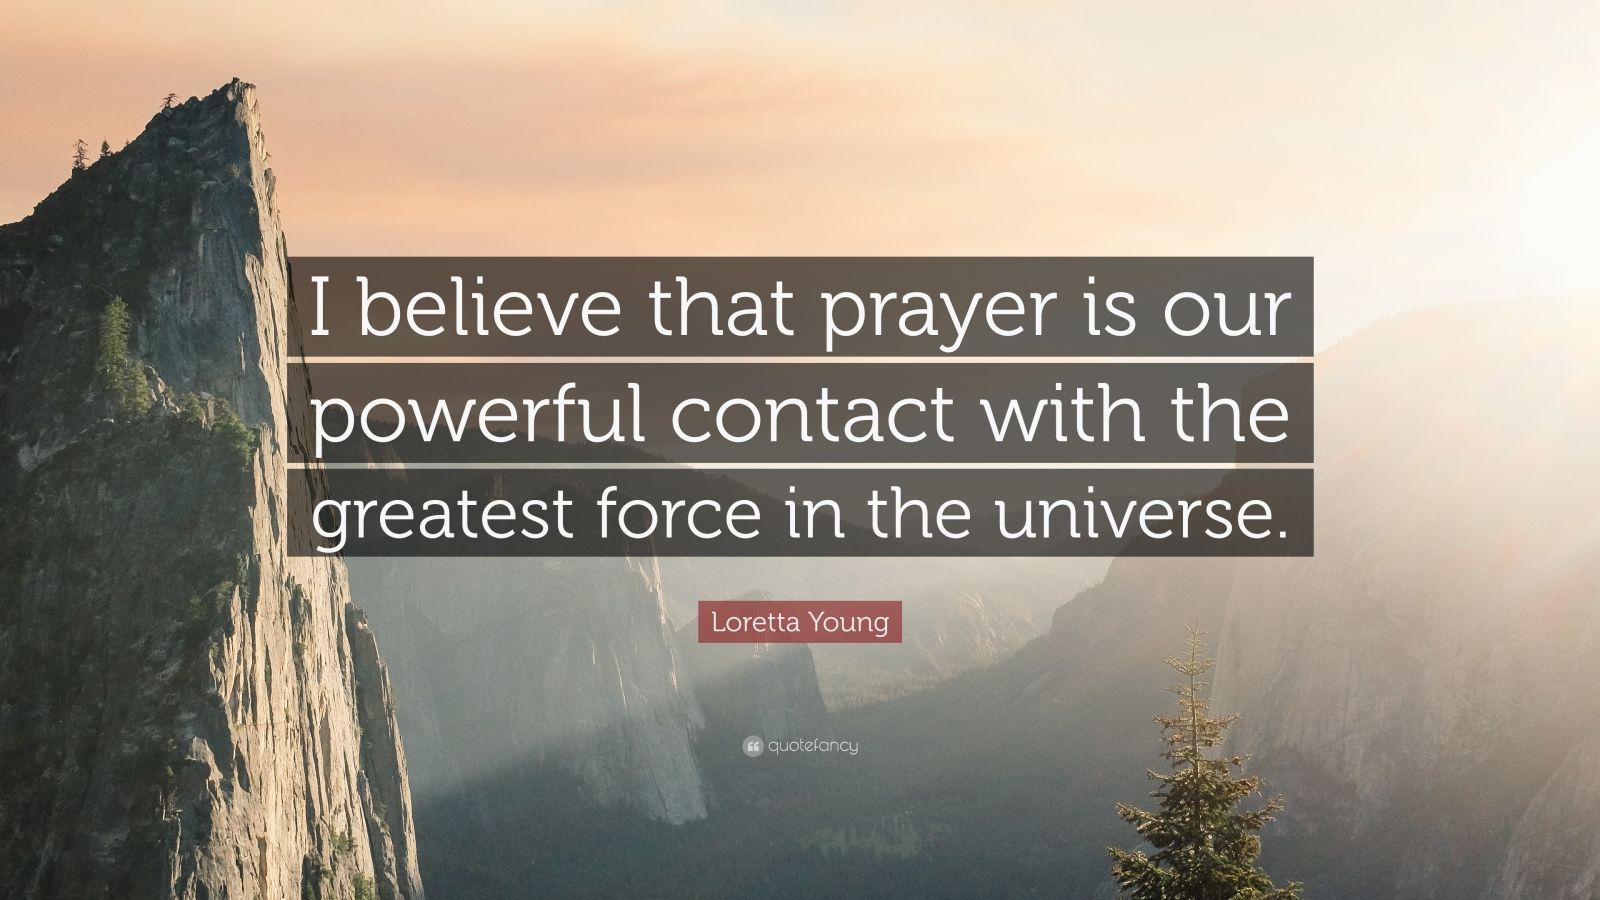 Loretta Young Quote: “I believe that prayer is our powerful contact ...